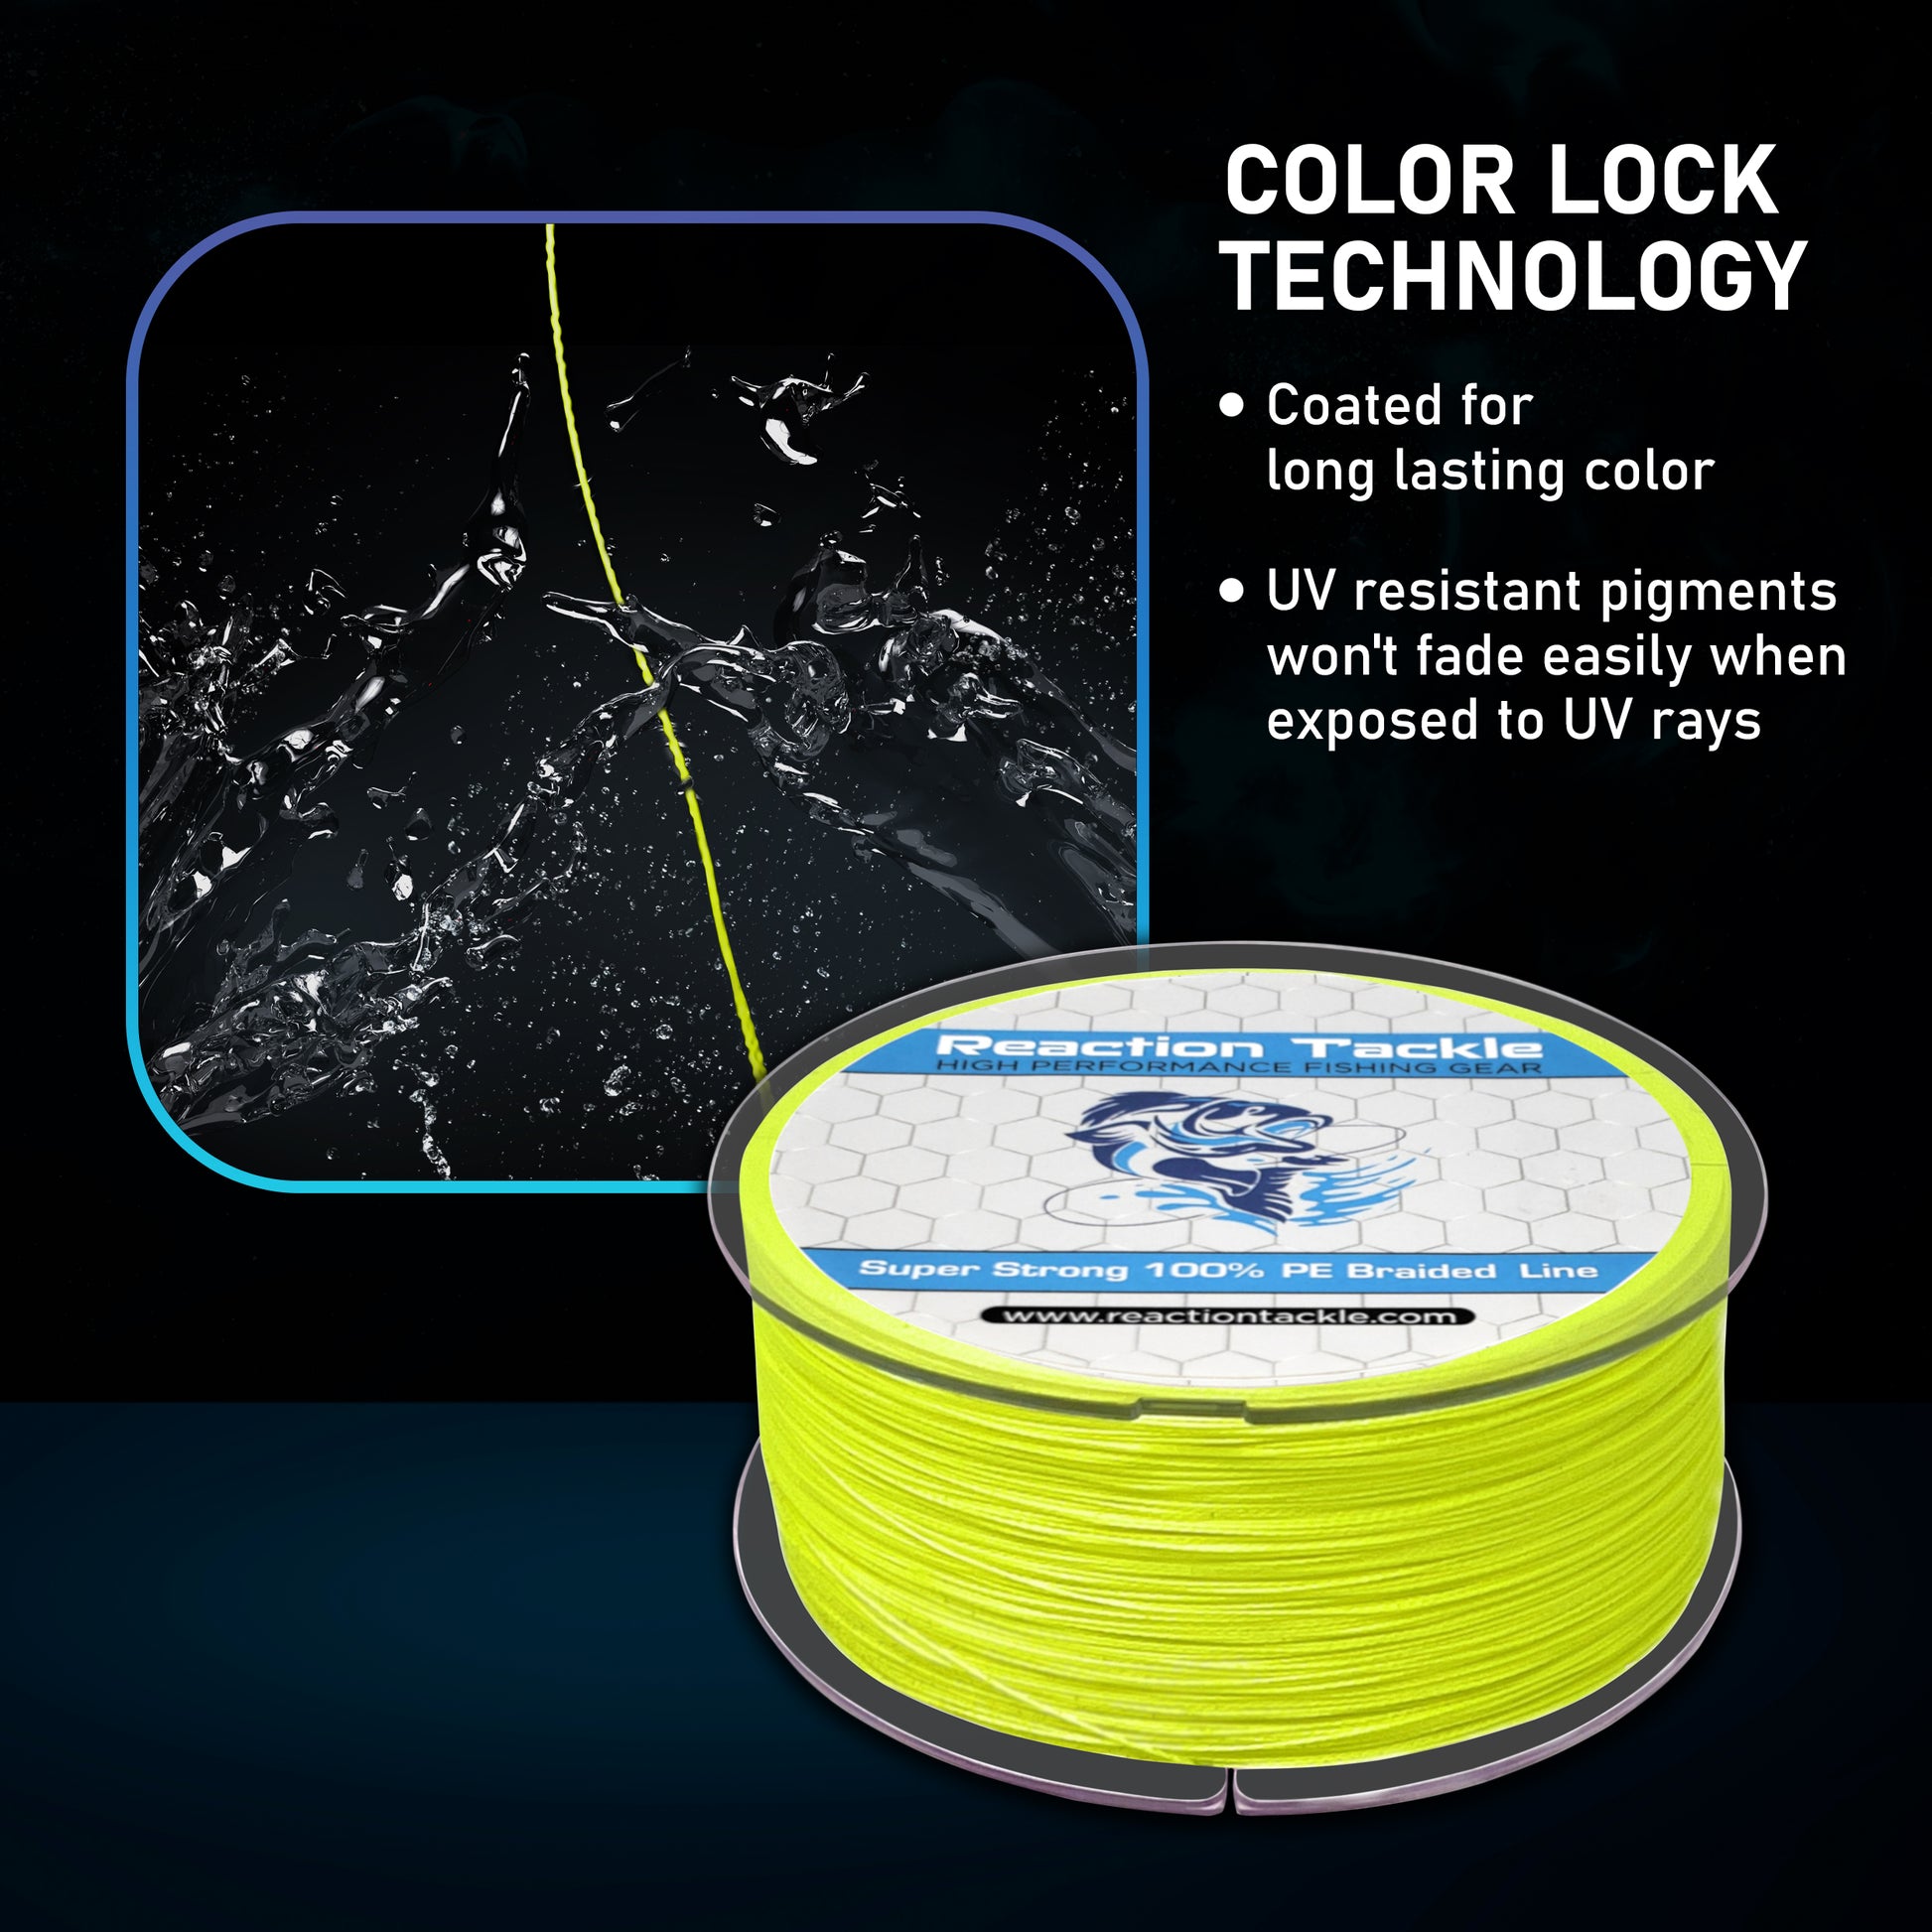 Reaction Tackle Ice Monofilament Fishing Line - High Performance Ice  Fishing Line with Low Memory, High Abrasion Resistance, Freezing-Resistant  